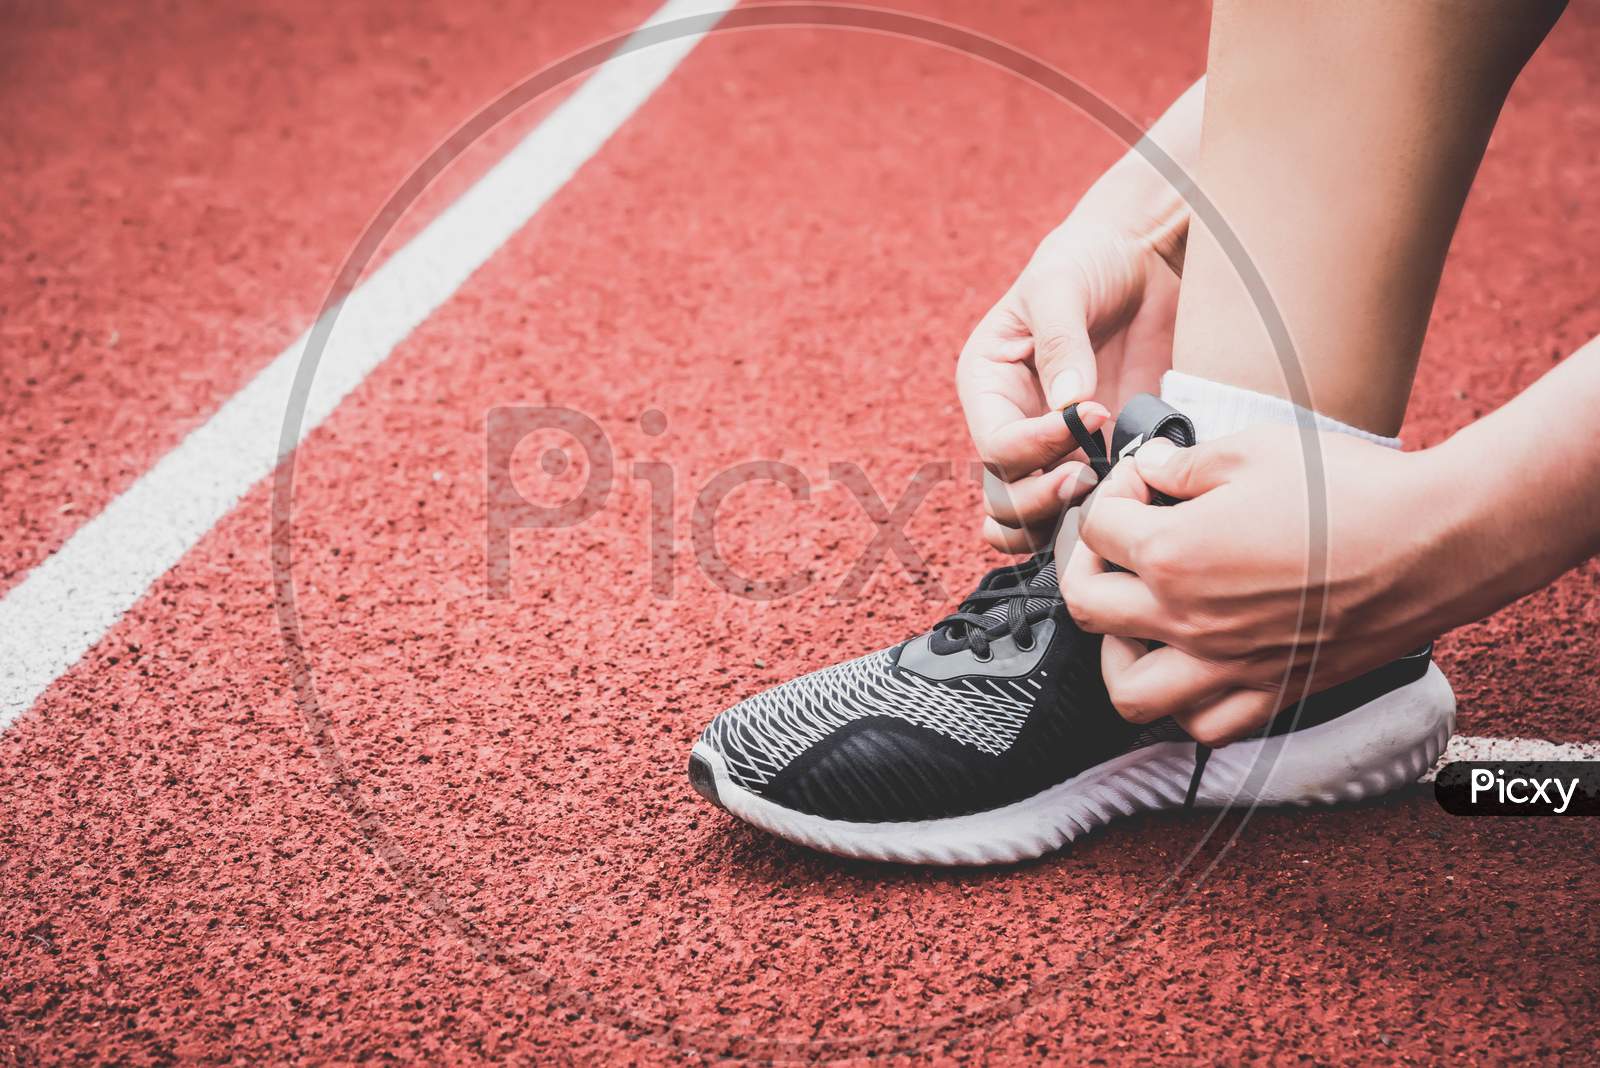 Closeup Of Sport Woman Tying Sneakers Shoelace Rope At Running Track Lane In Stadium. Sport Center And Fitness Gym Concept. Healthy And Body Build Up Theme. Sportswear And Fashion Theme